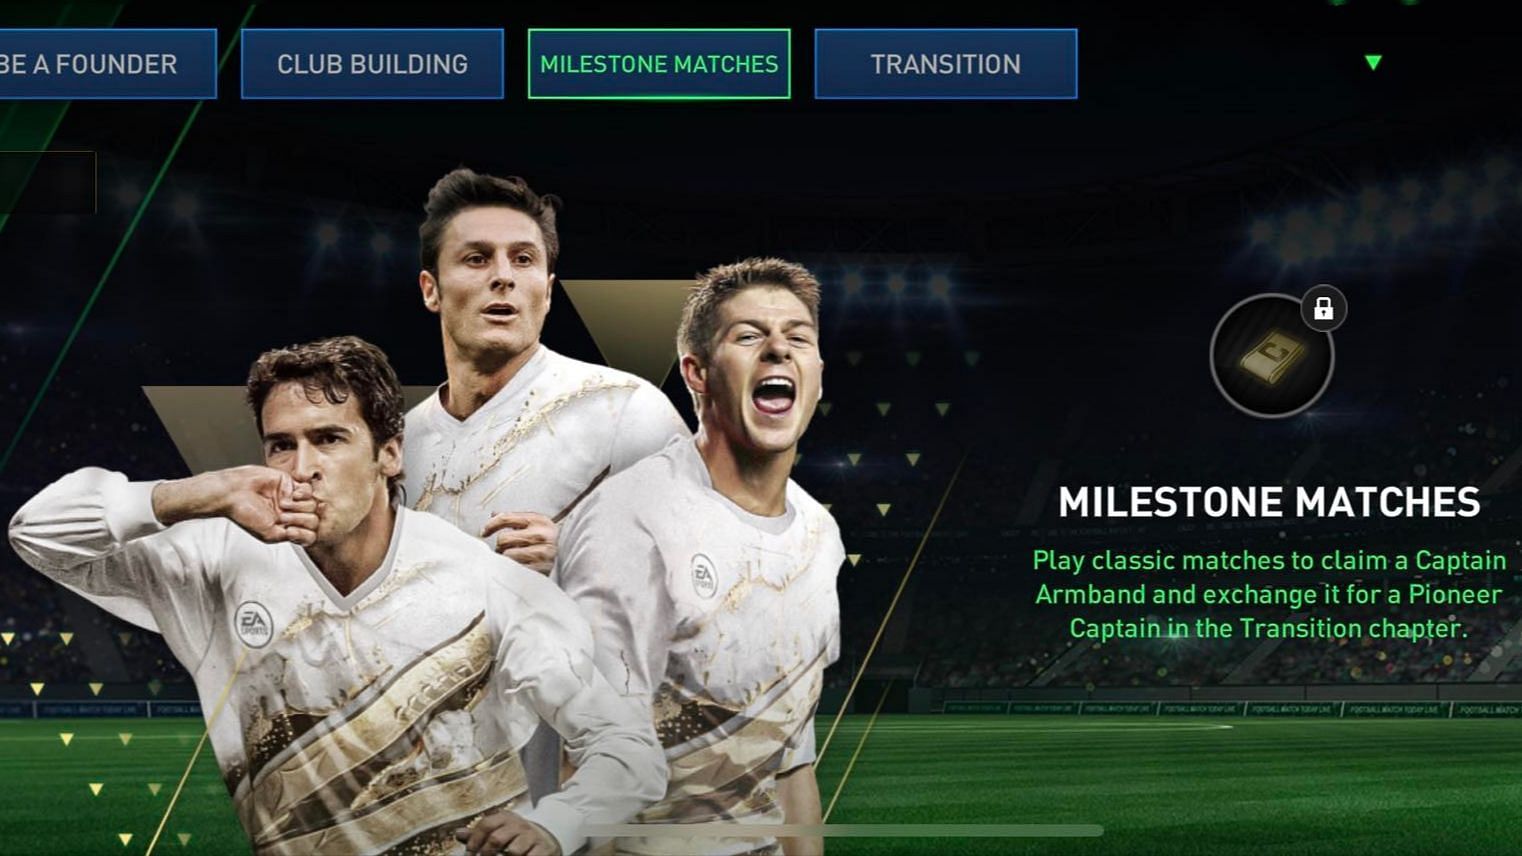 What If' event in FIFA Mobile (Official Announcement) : r/FUTMobile